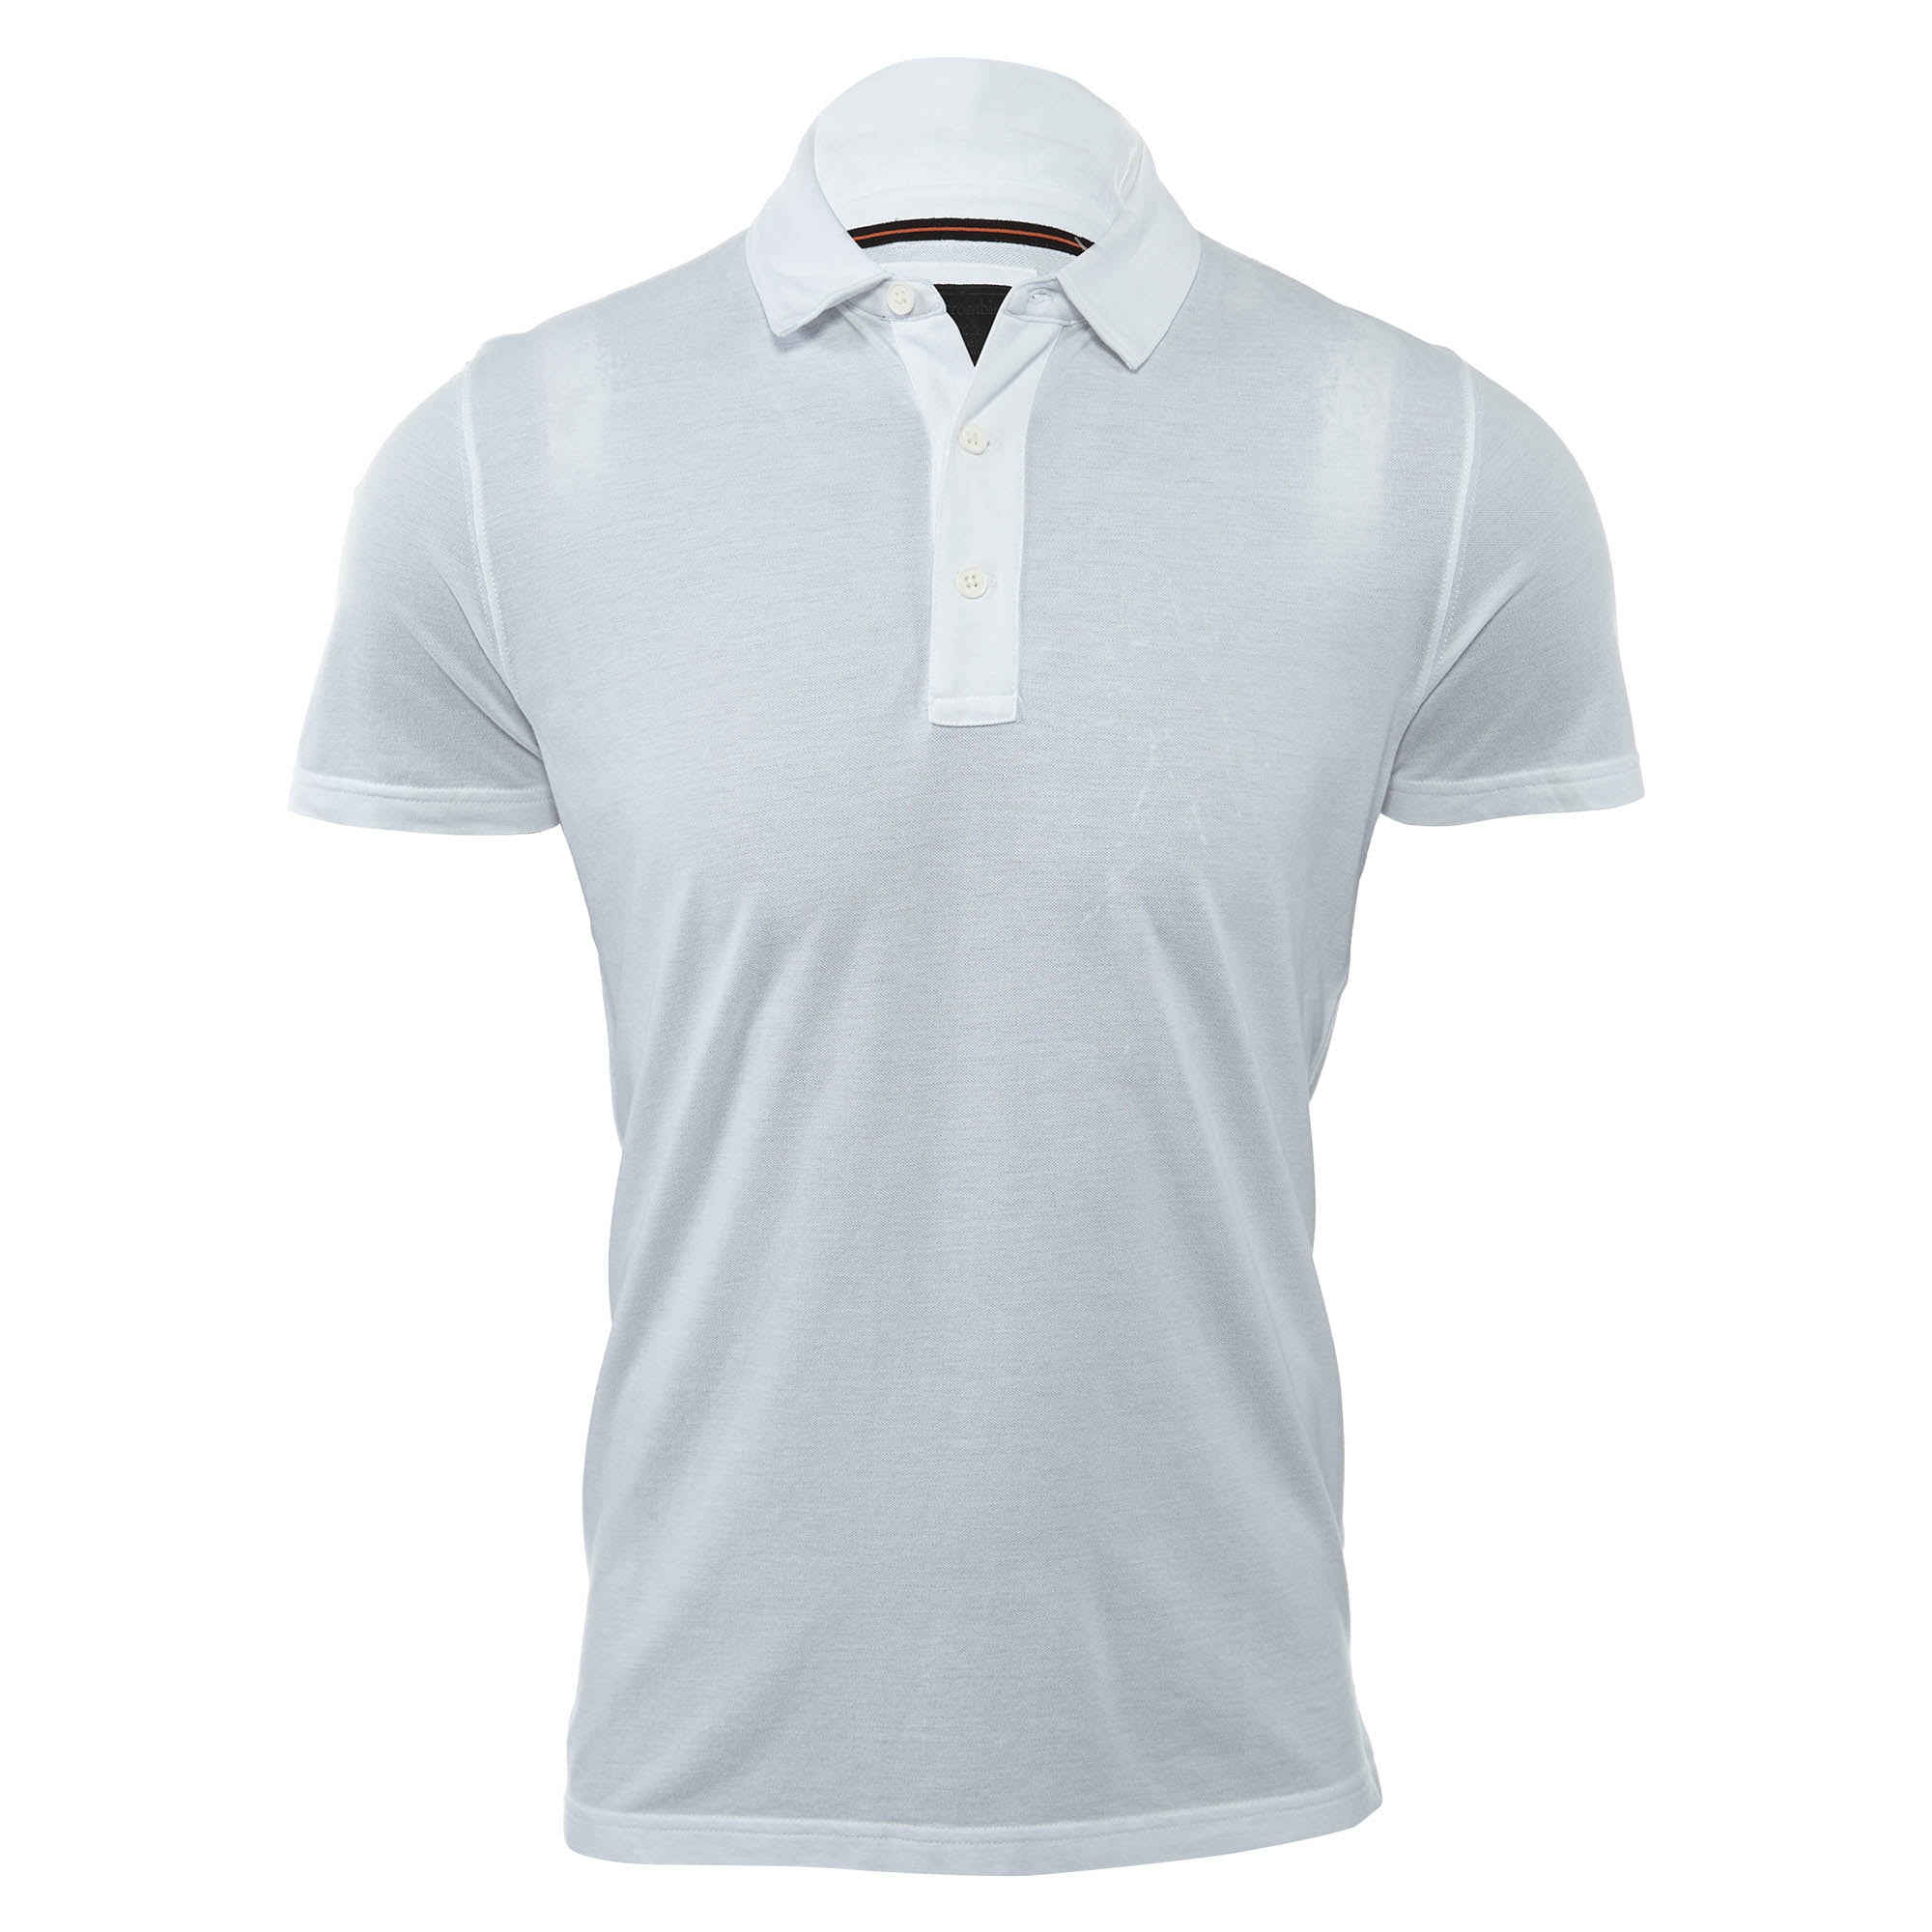 Abercrombie & Fitch - Abercrombie & Fitch Sport Polo Signature Fit ...